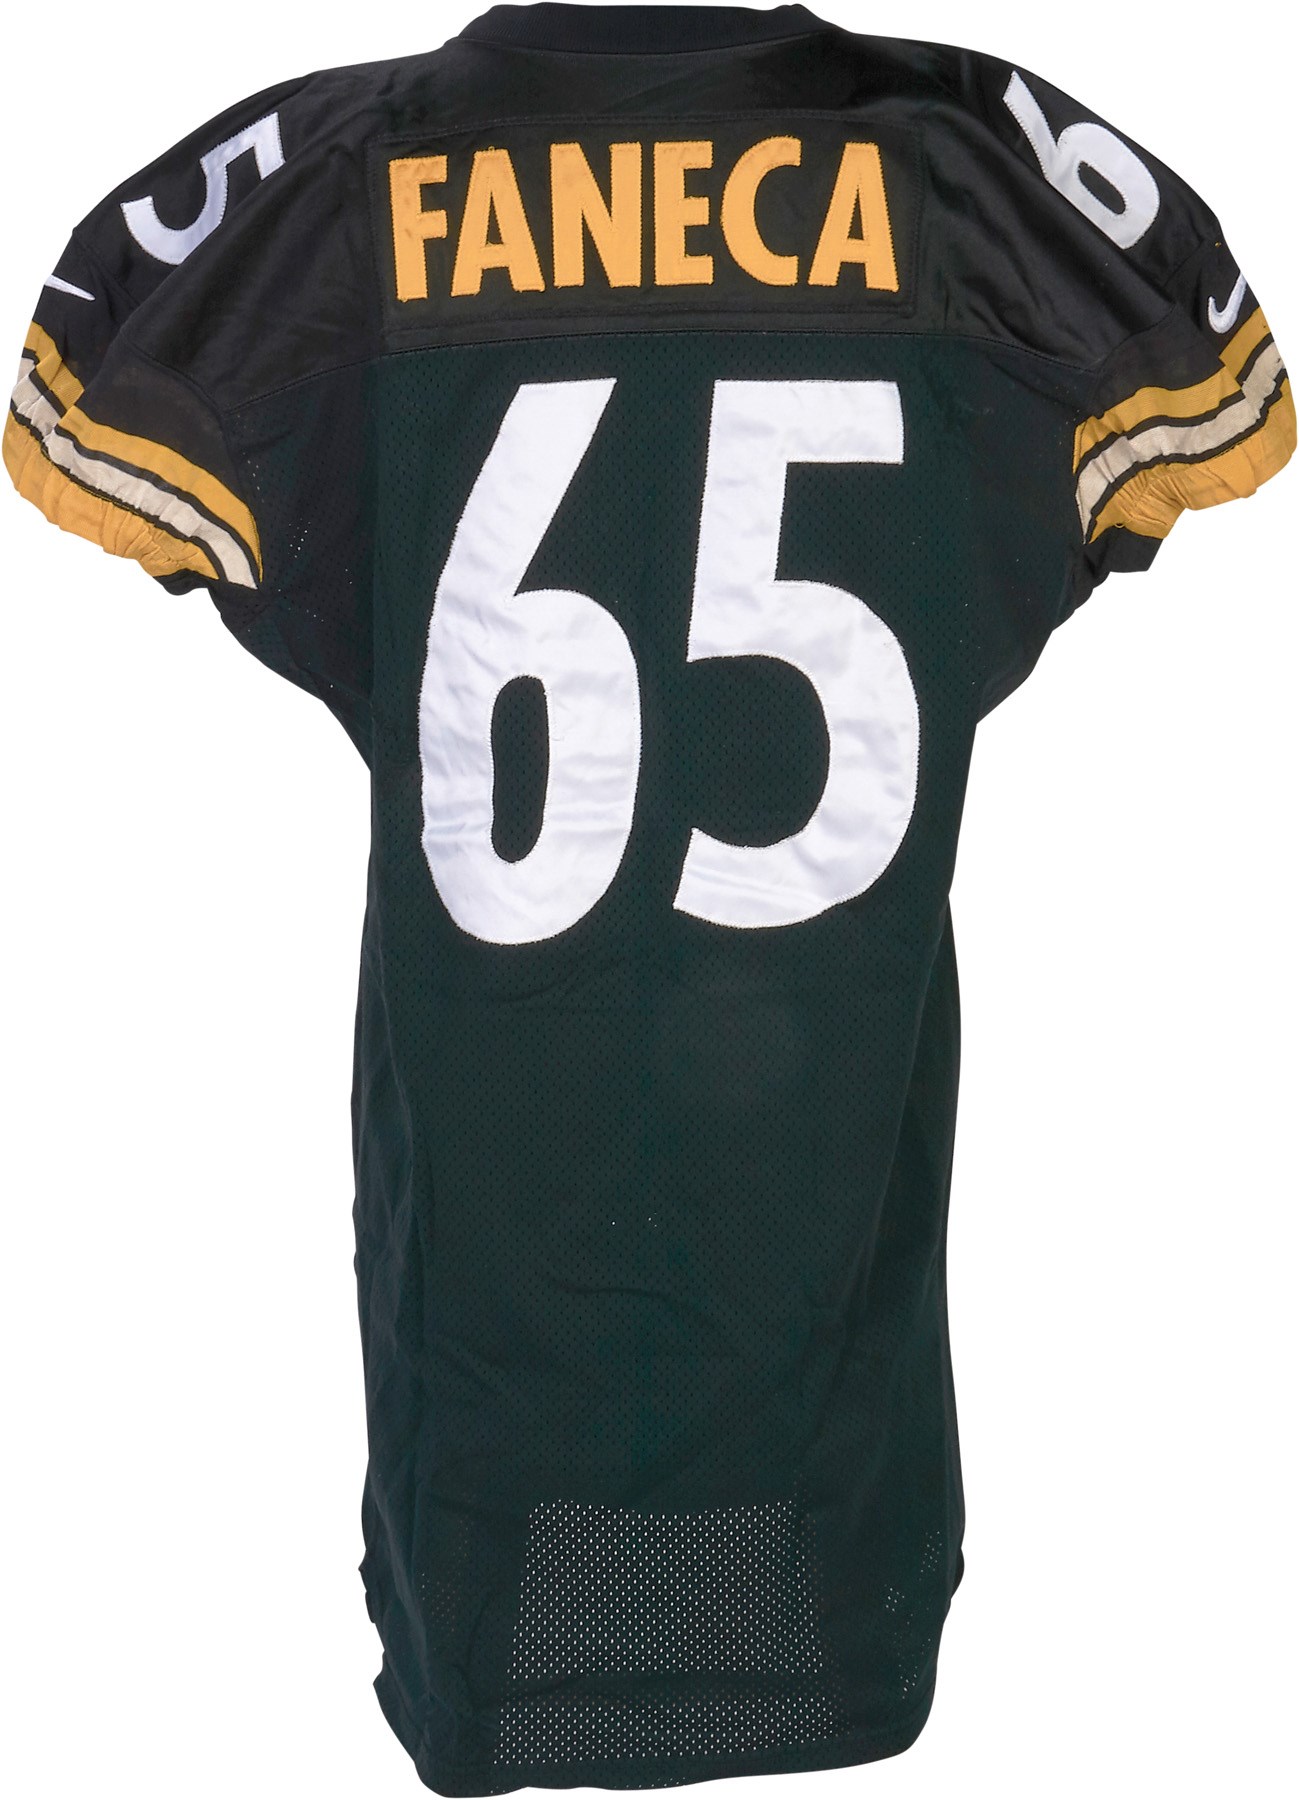 The Pittsburgh Steelers Game Worn Jersey Archive - 1998 Alan Faneca Pittsburgh Steelers Game Worn Rookie Jersey